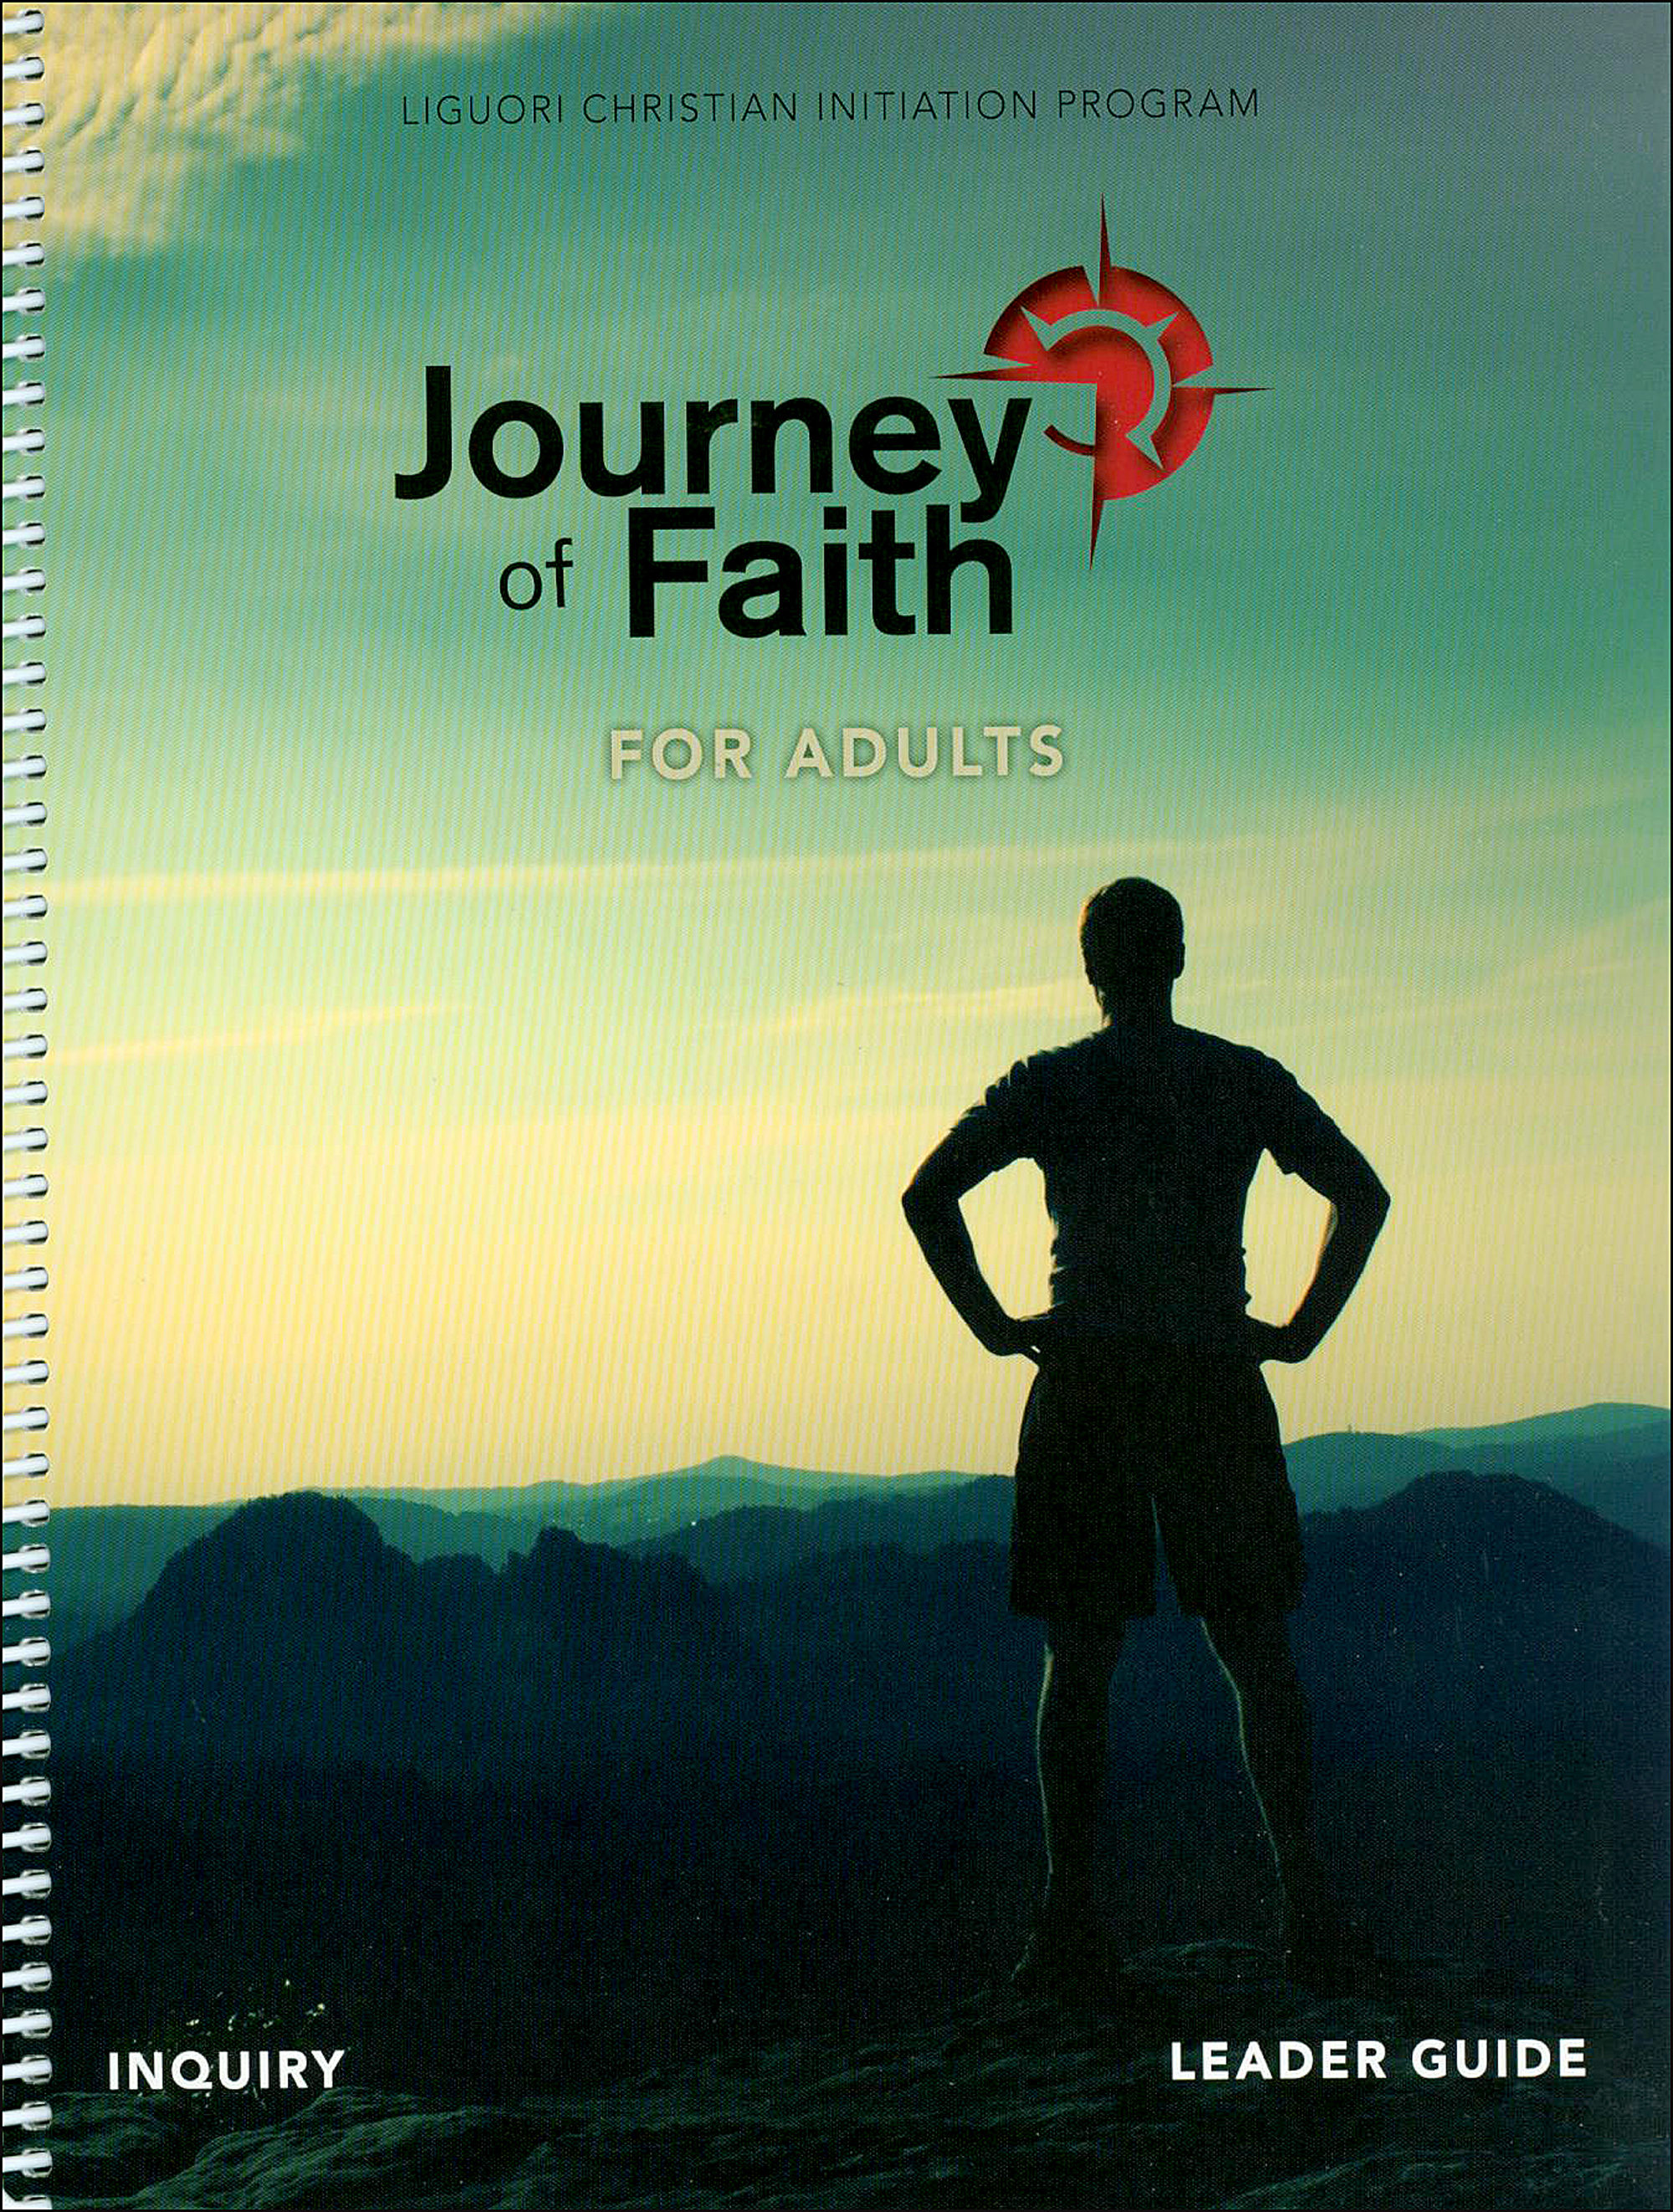 journey of faith conference